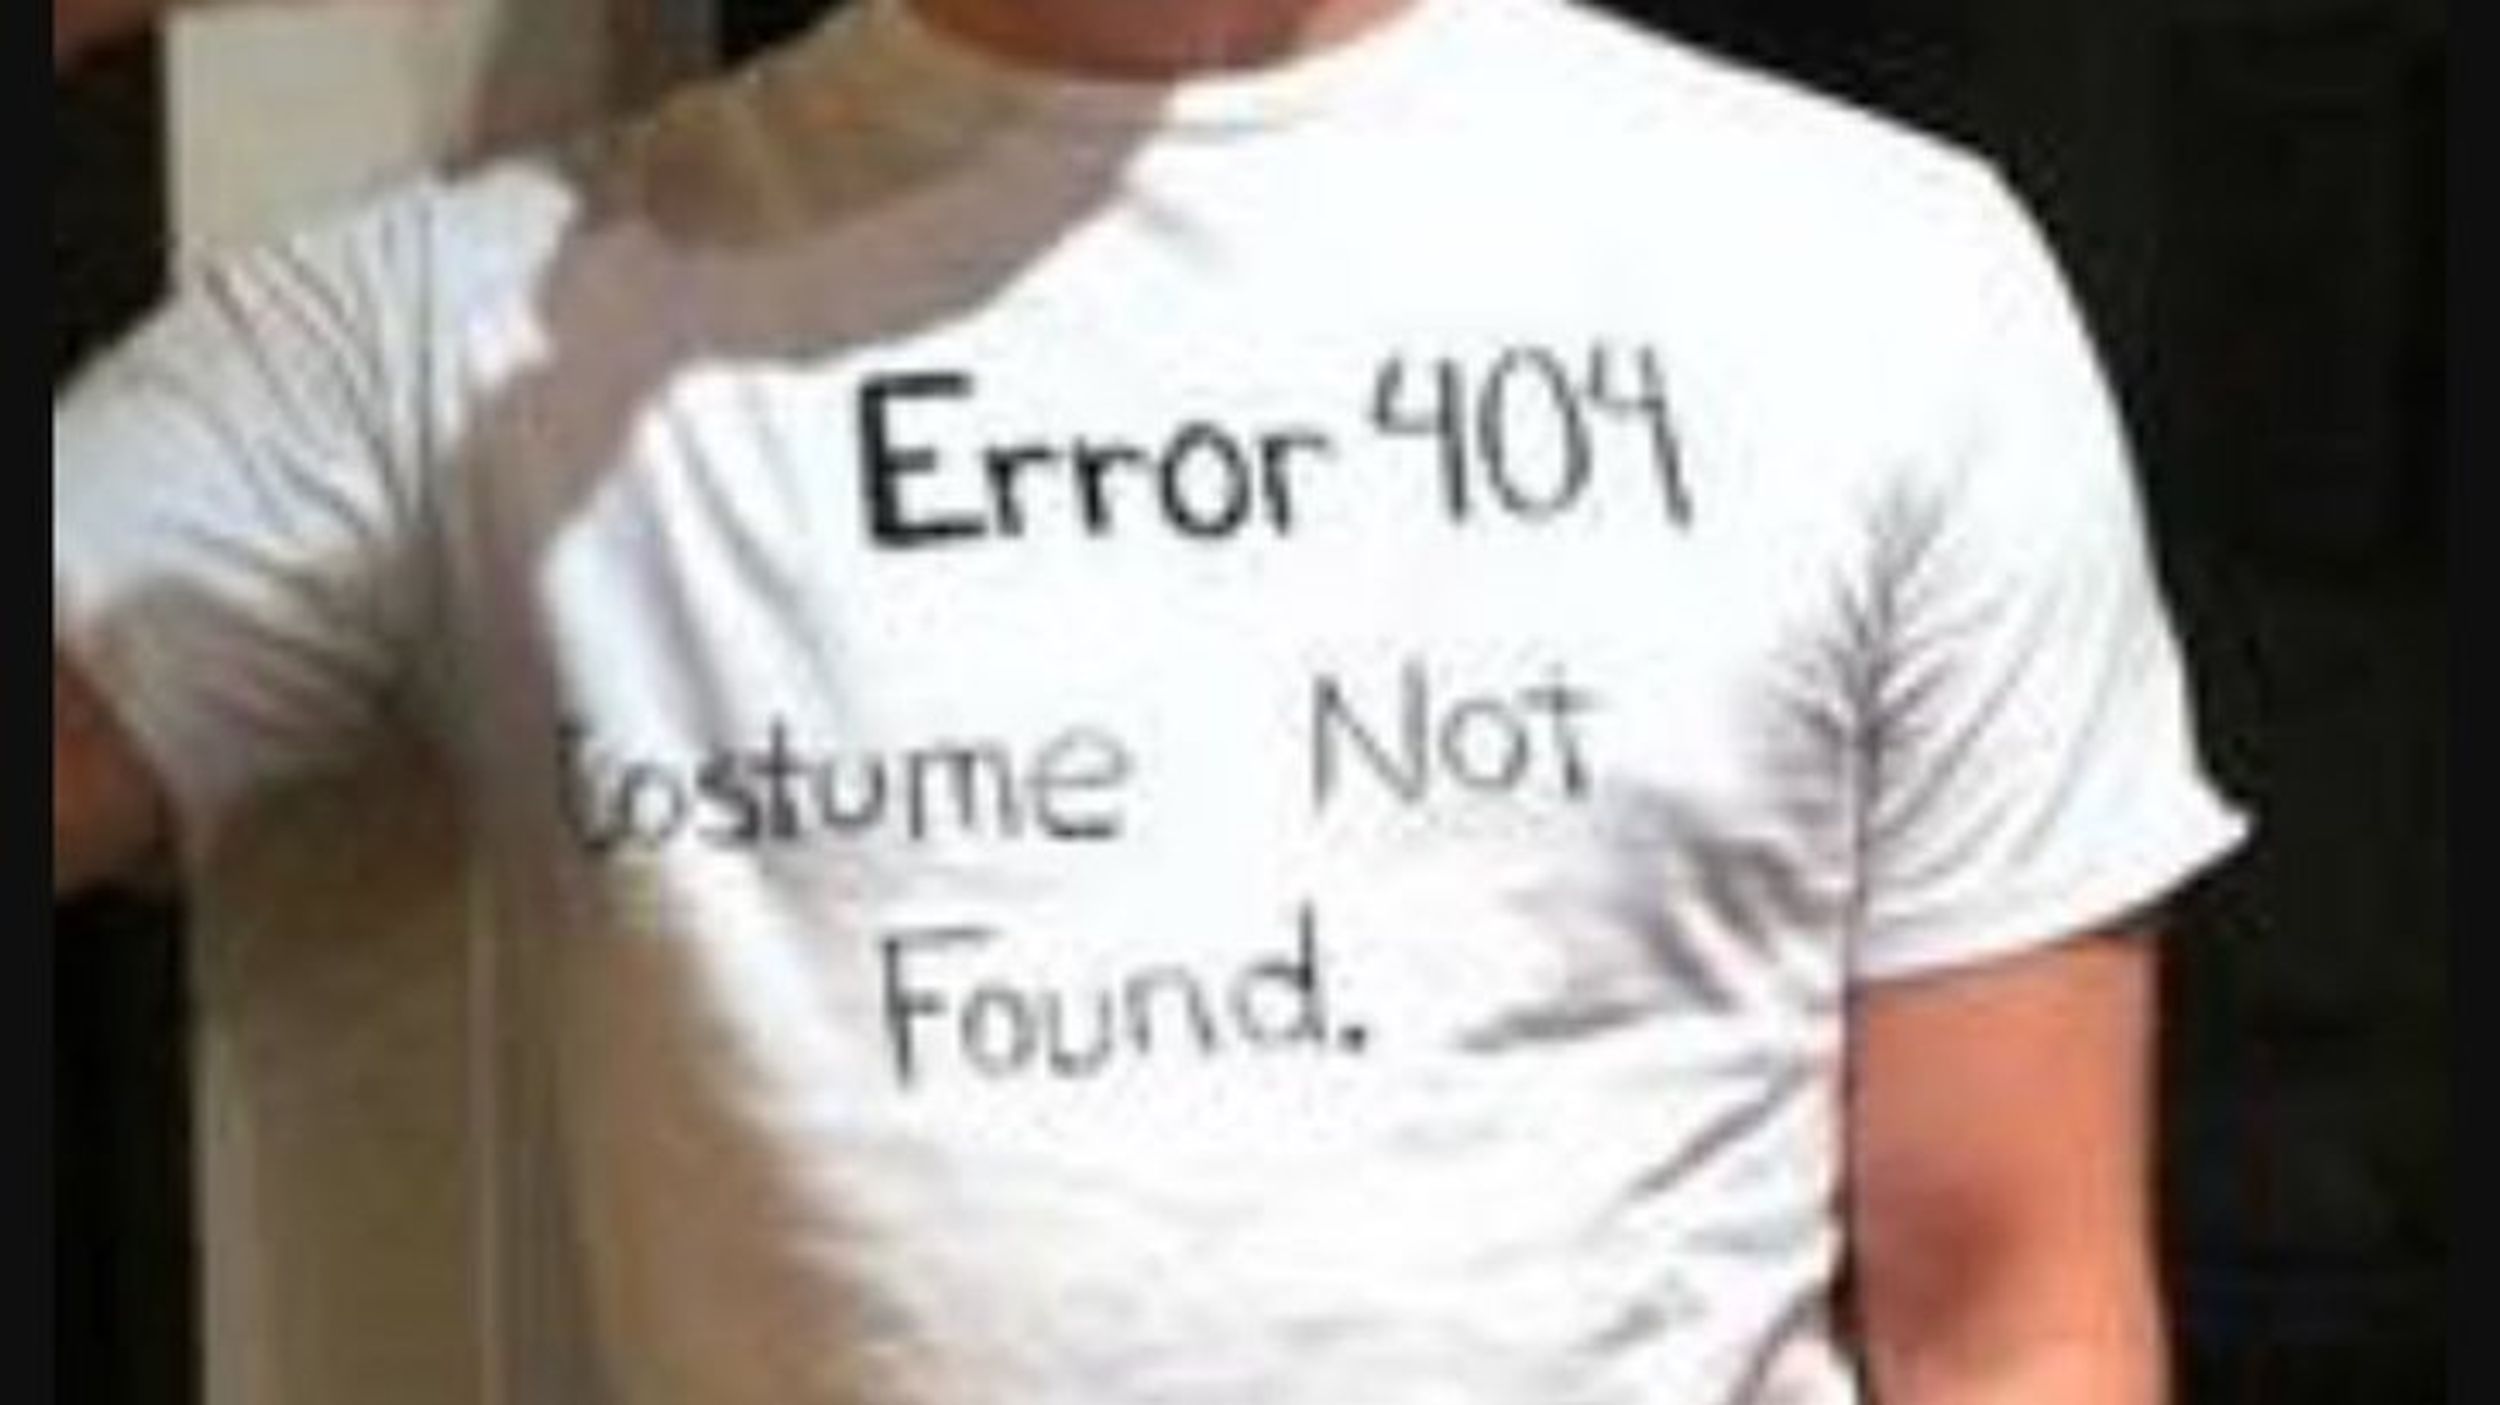 #IDontDressUpBecause: People Explain Why They Protest Halloween Costumes